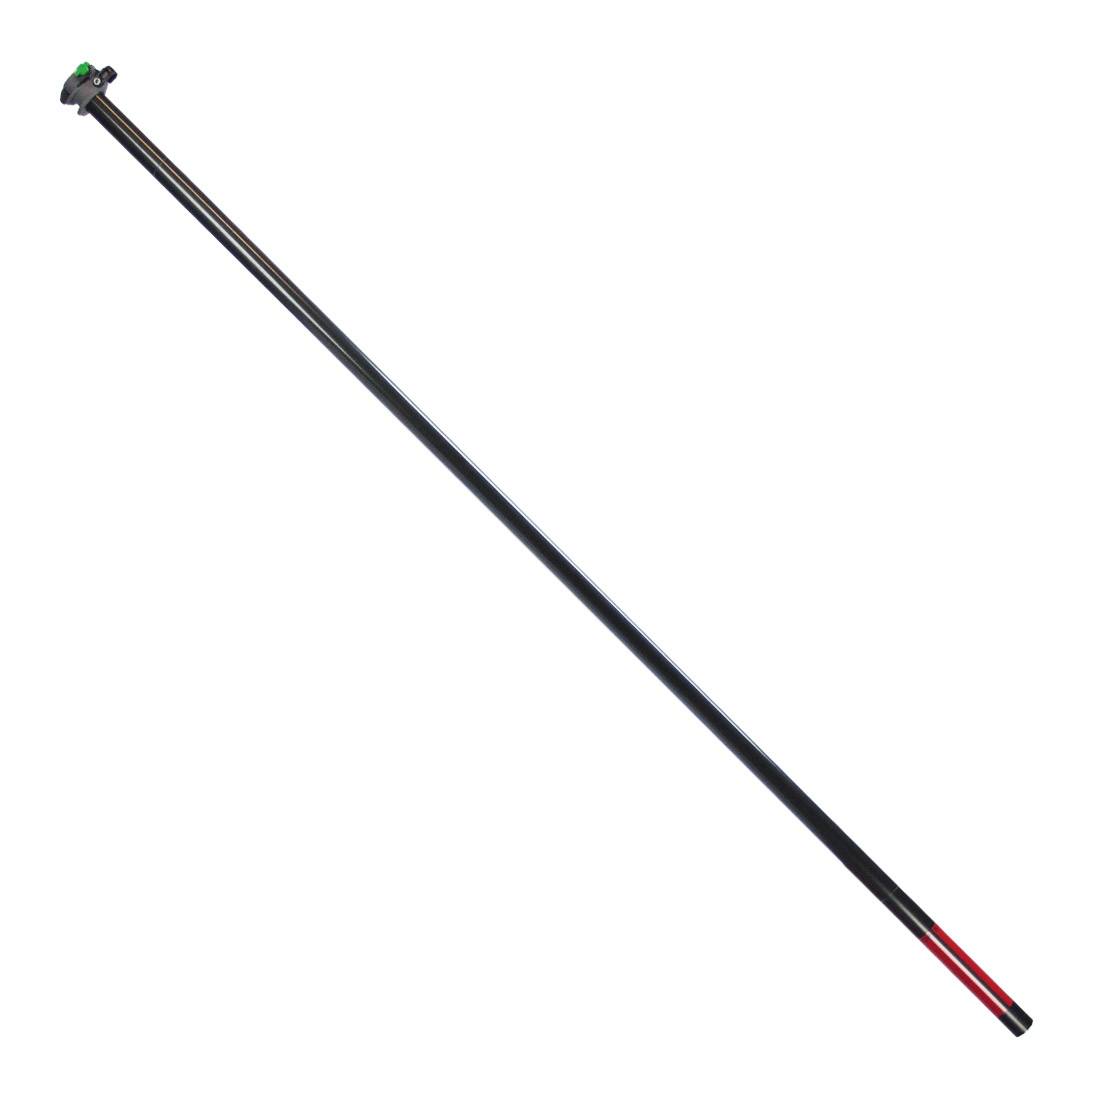 Unger-nLite-Hybrid-Master-Pole-Replacement-Section-Full-View